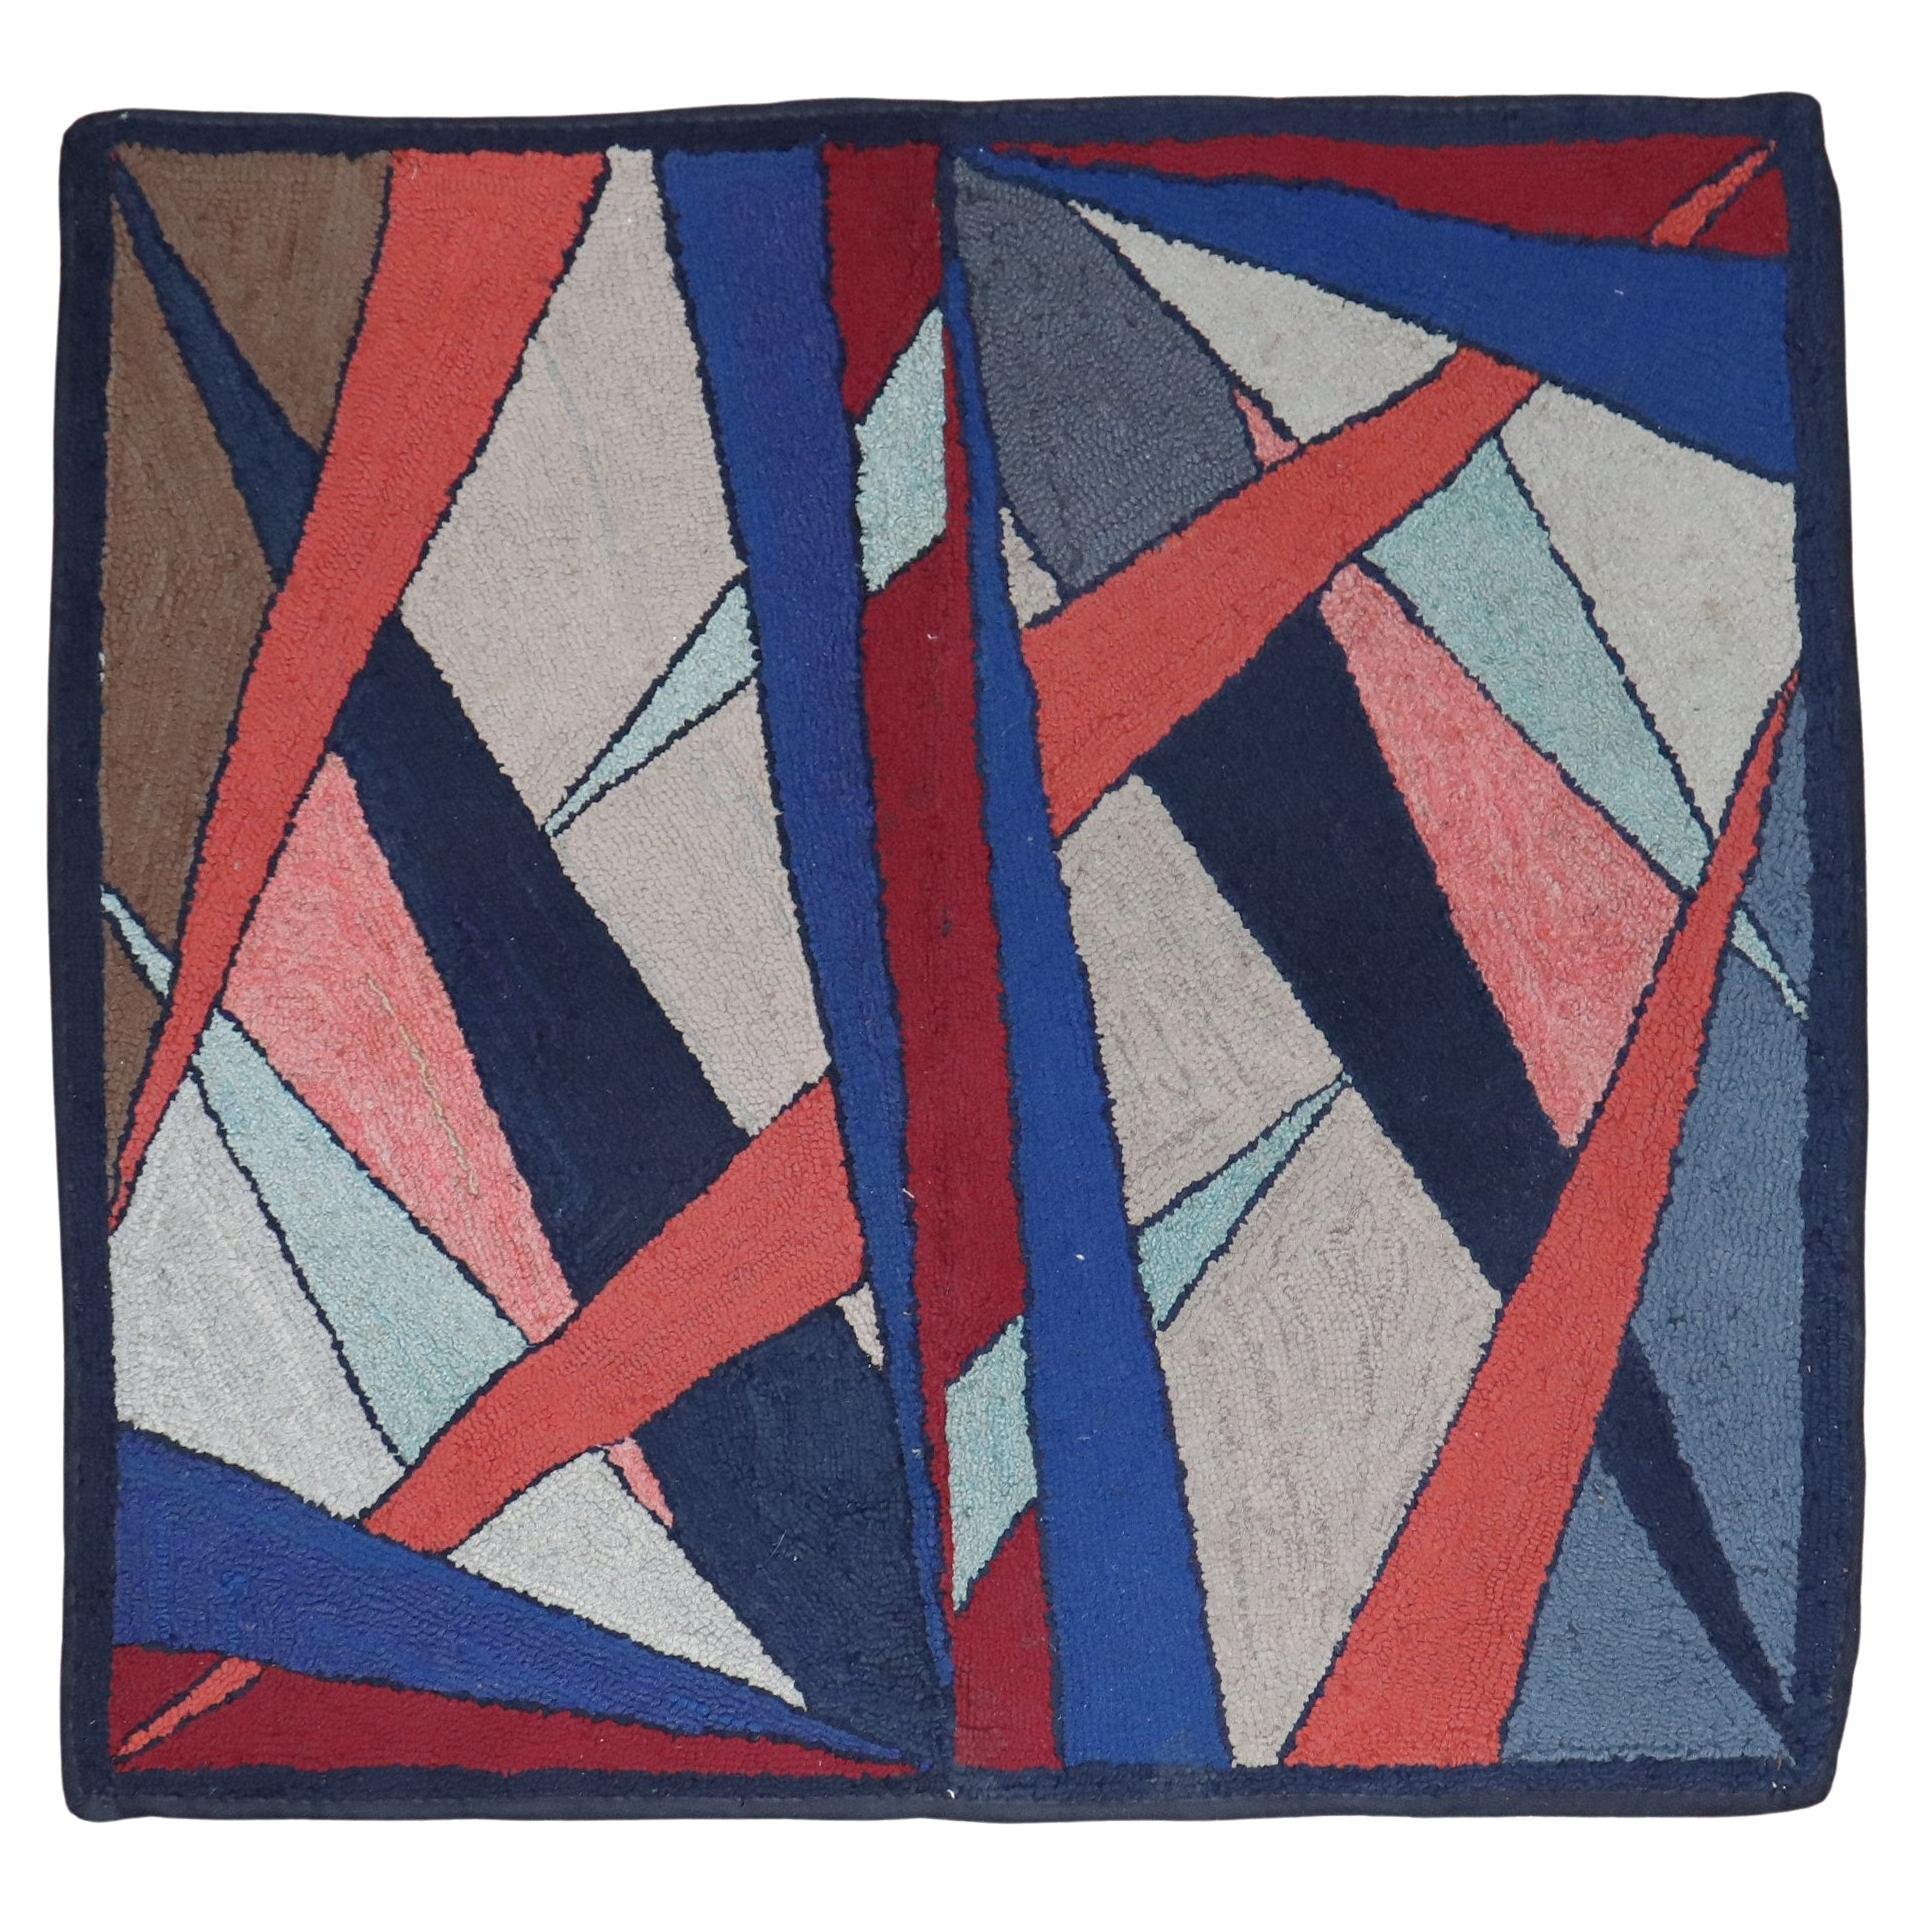 The Collective Abstract American Hooked Scatter Square Rug (tapis carré crocheté)